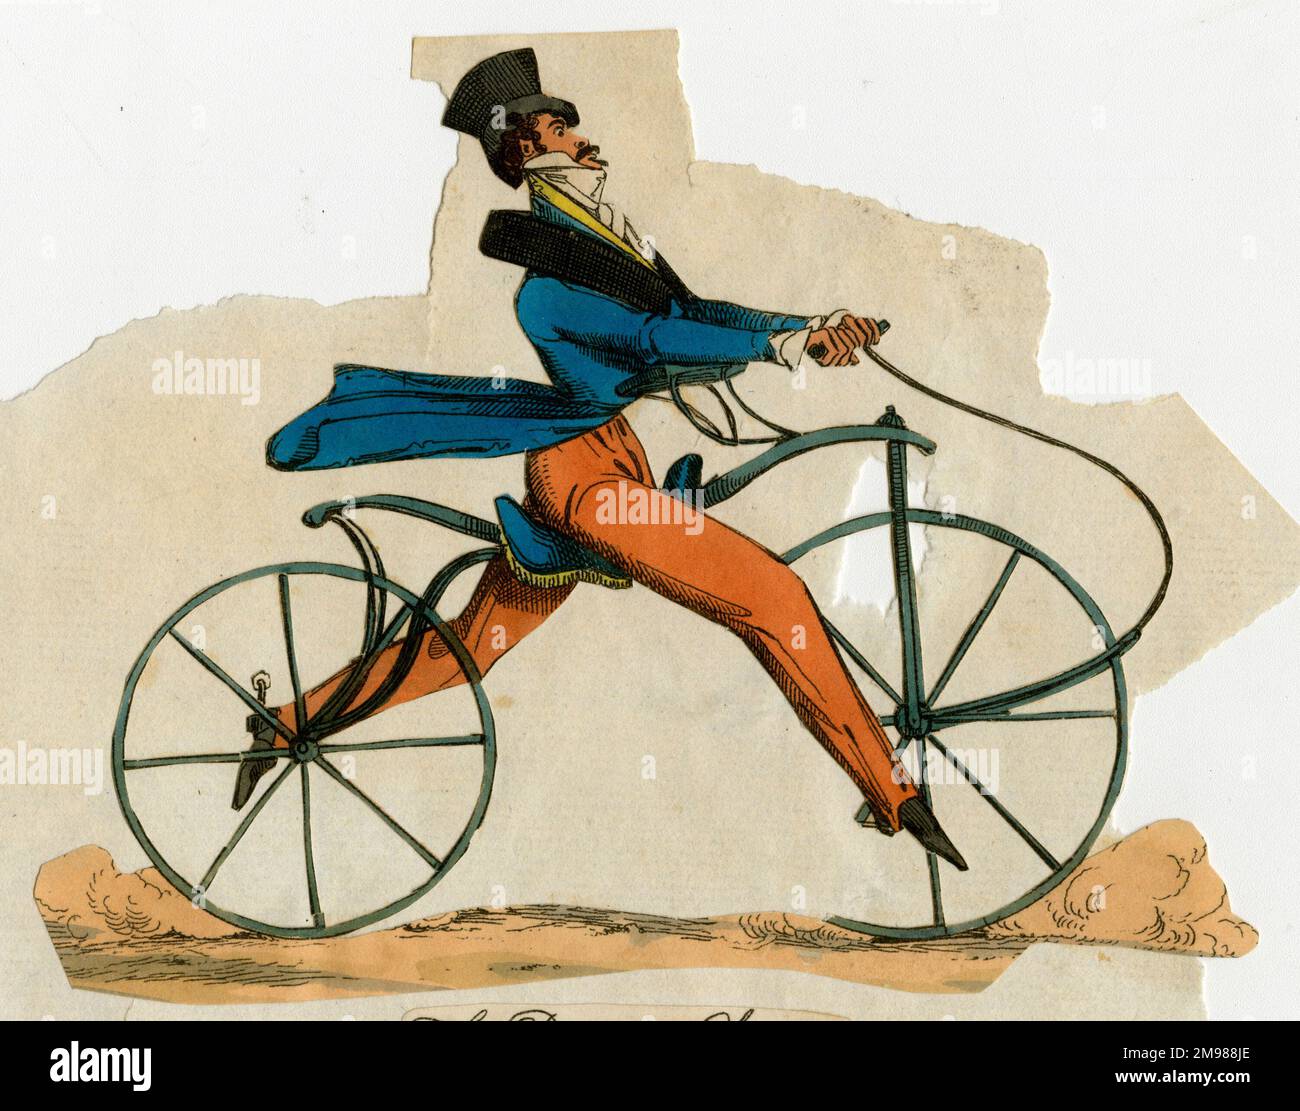 The Dandy Charger - man on a boneshaker bicycle. Stock Photo